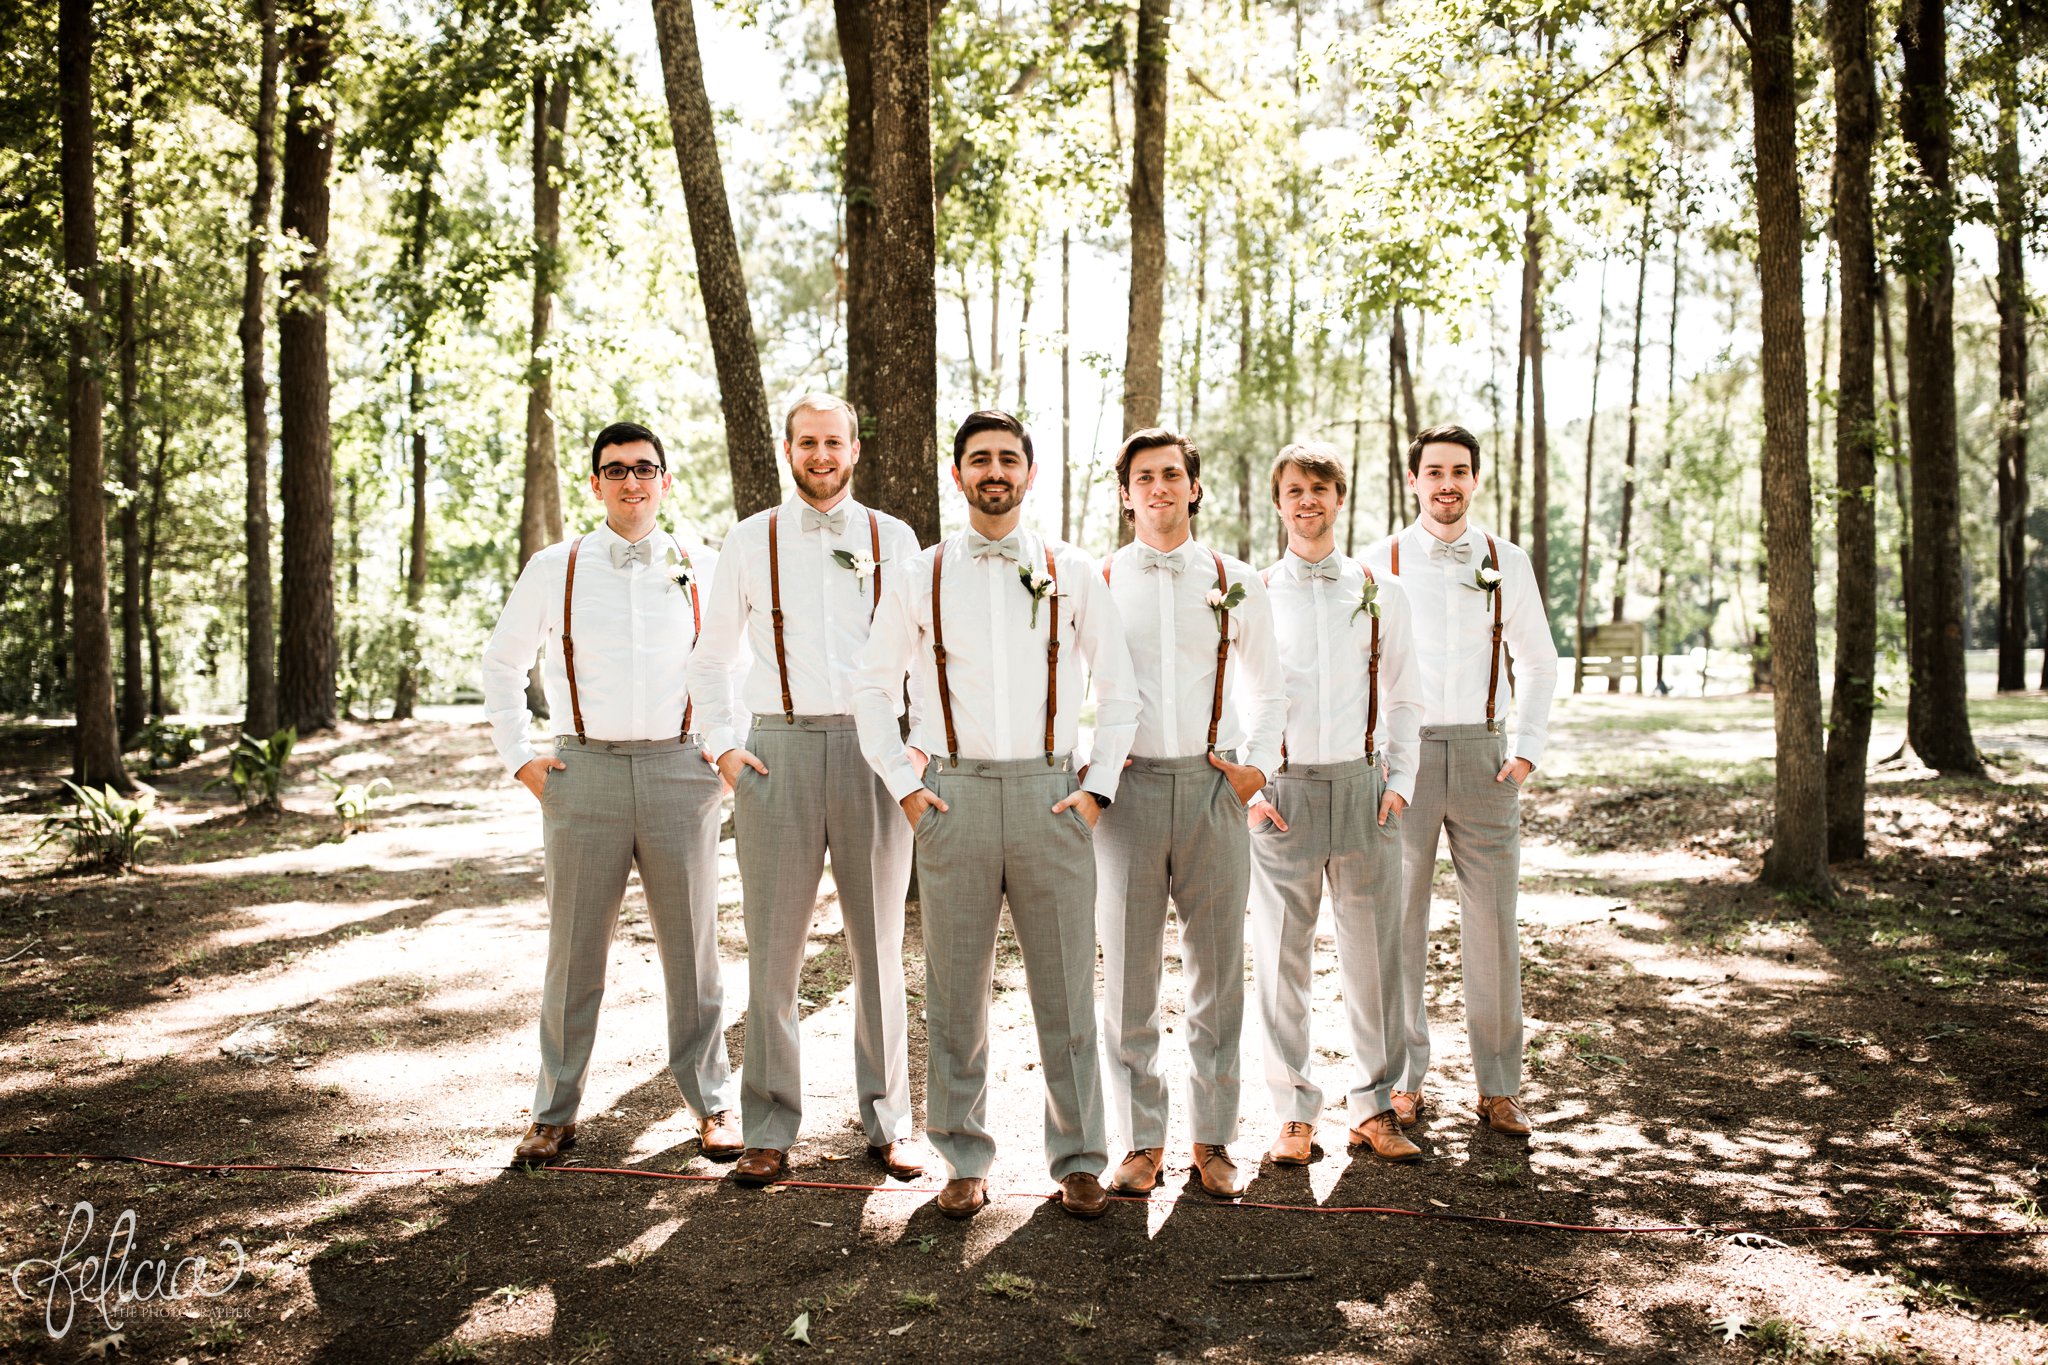 images by feliciathephotographer.com | destination wedding | the makey house | dave gibson coordinator | travel photographer | Savannah, georgia | southern | portrait | groomsmen | game face | pre-ceremony | trees | forest | brown hipster shoes | suspenders | bow ties | green